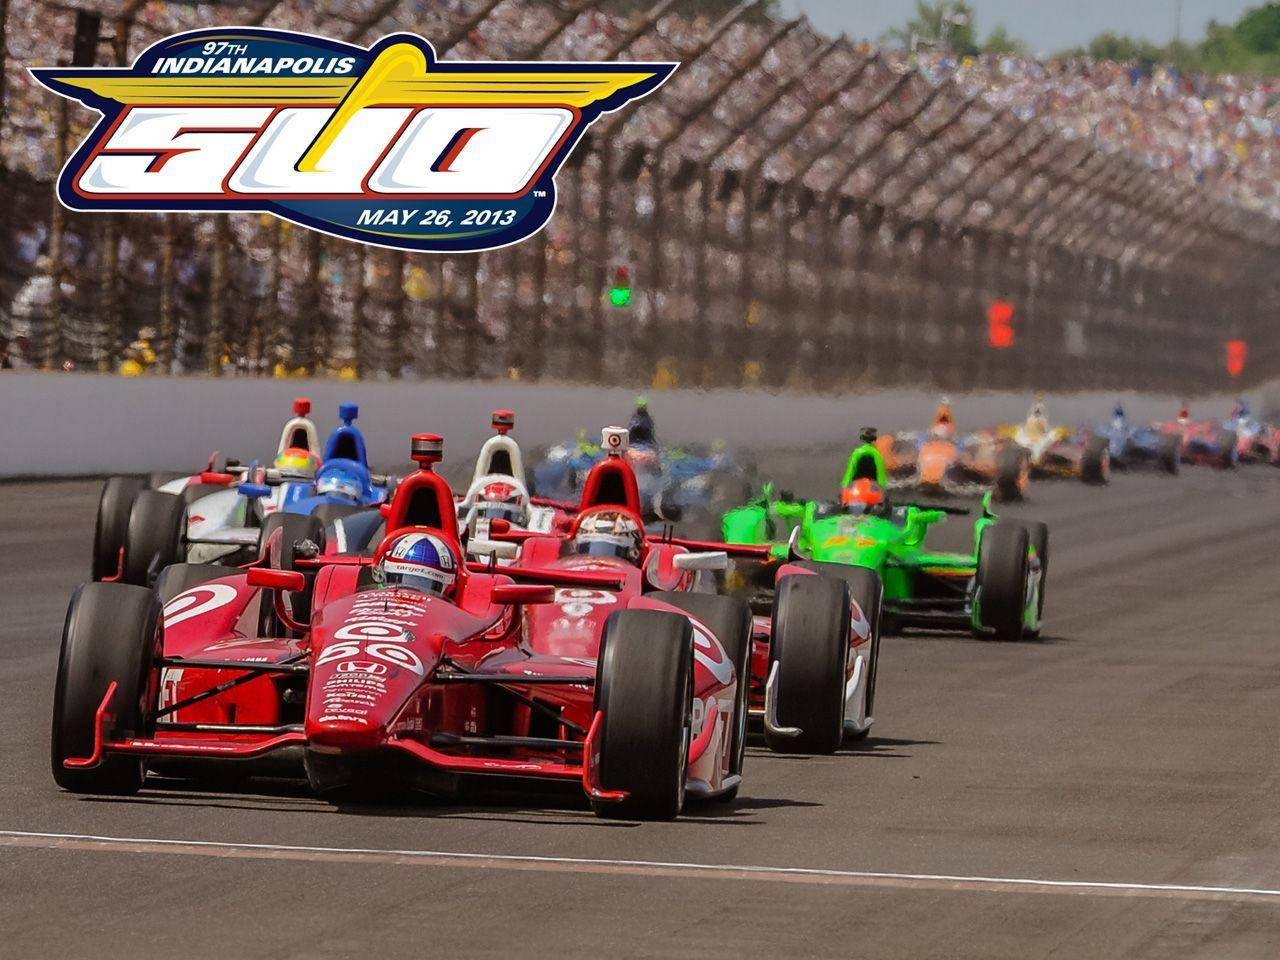 97th Indianapolis 500 Cover Background